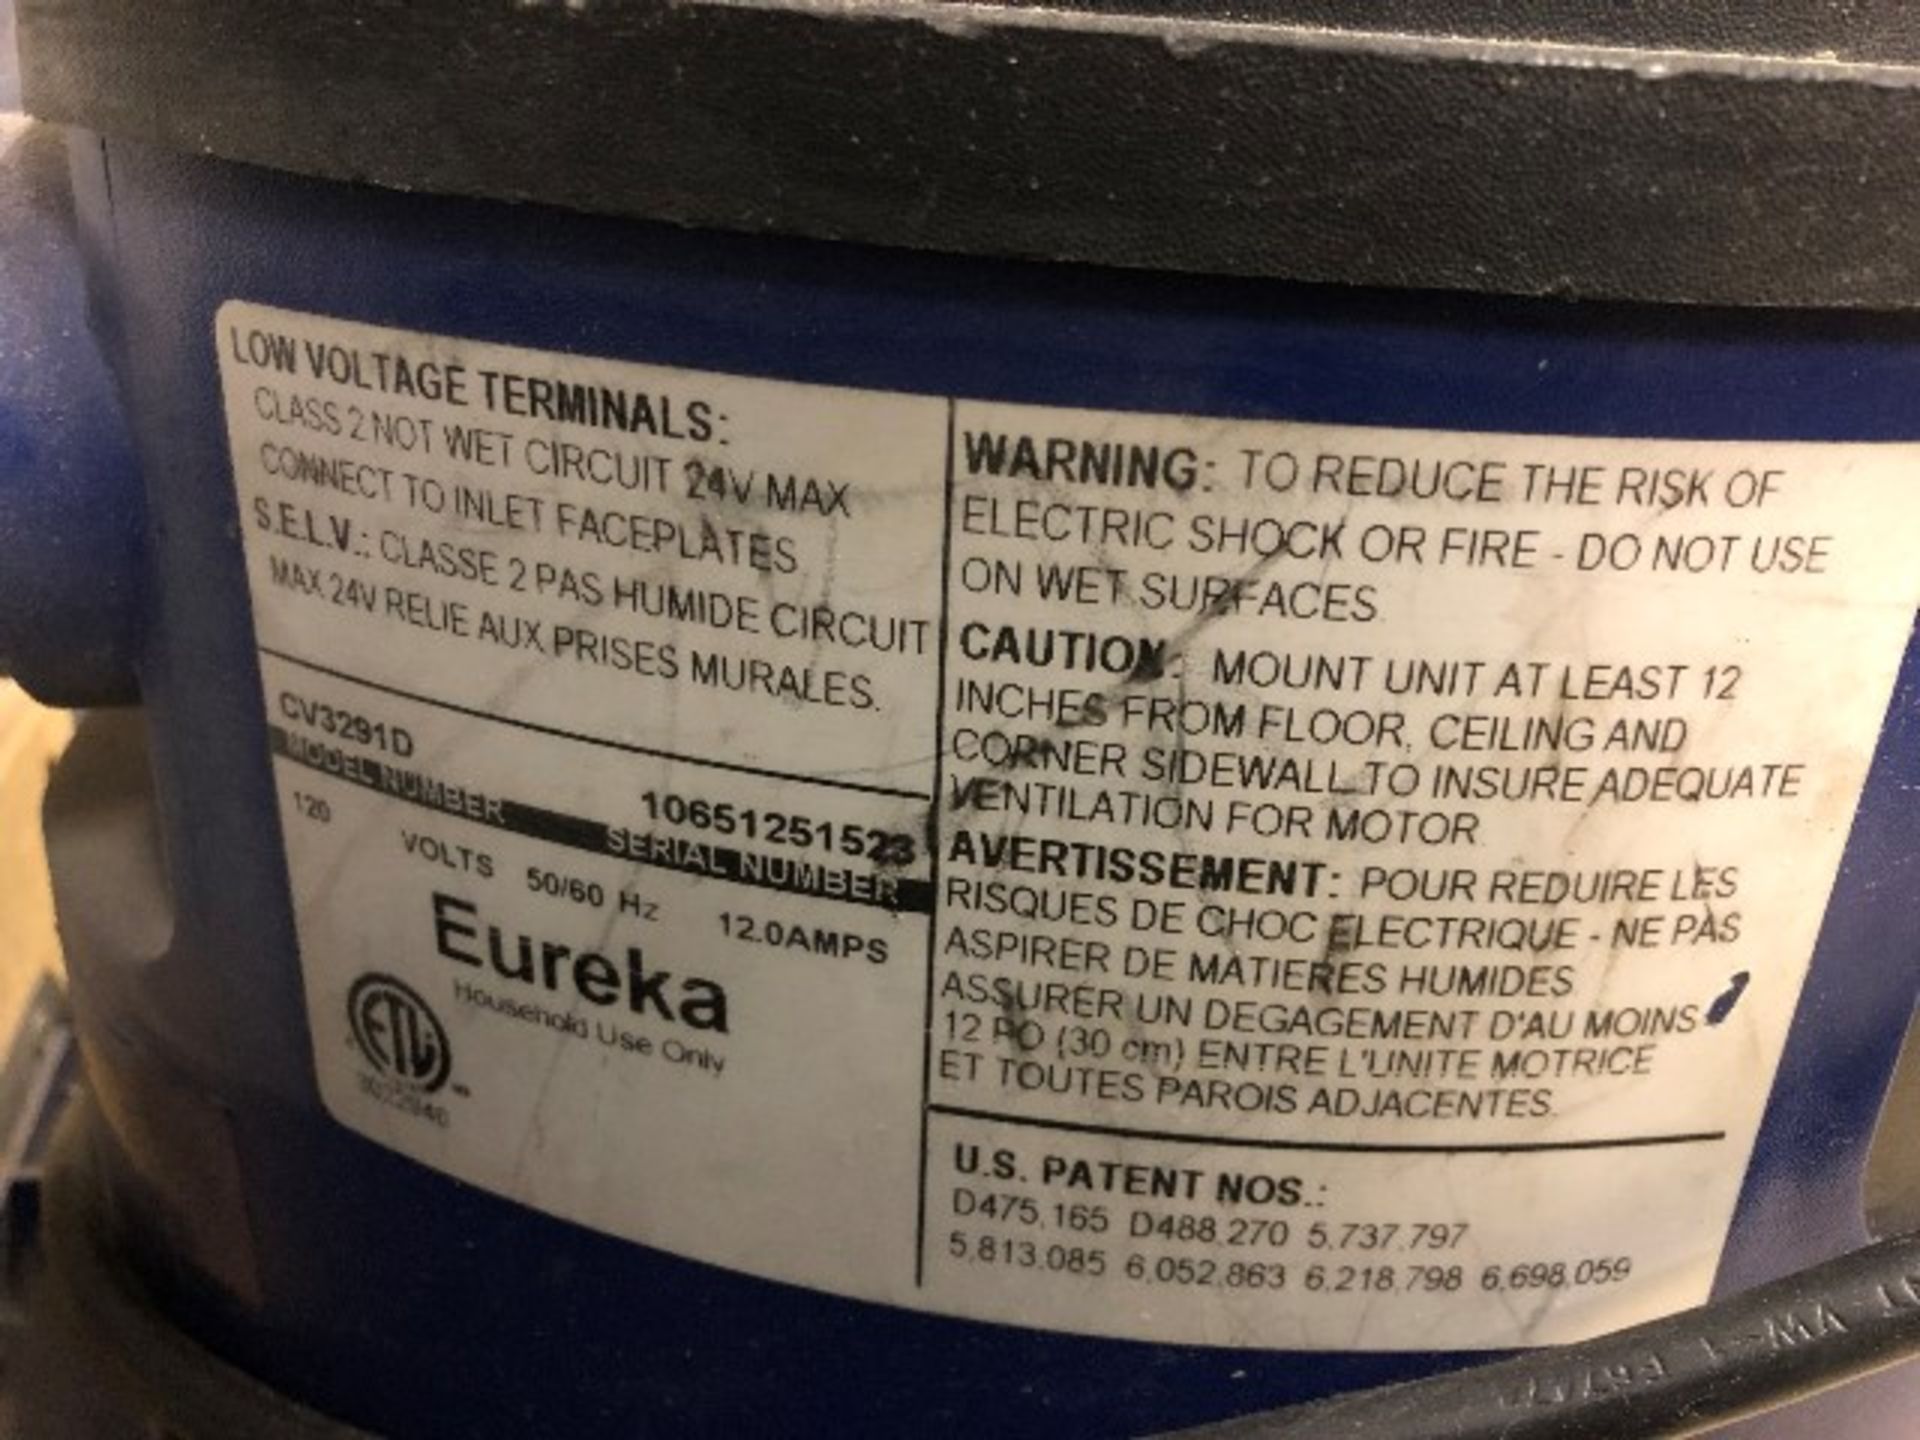 Eureka CV3291D central vacuum system w/power head, 12A - Image 2 of 2